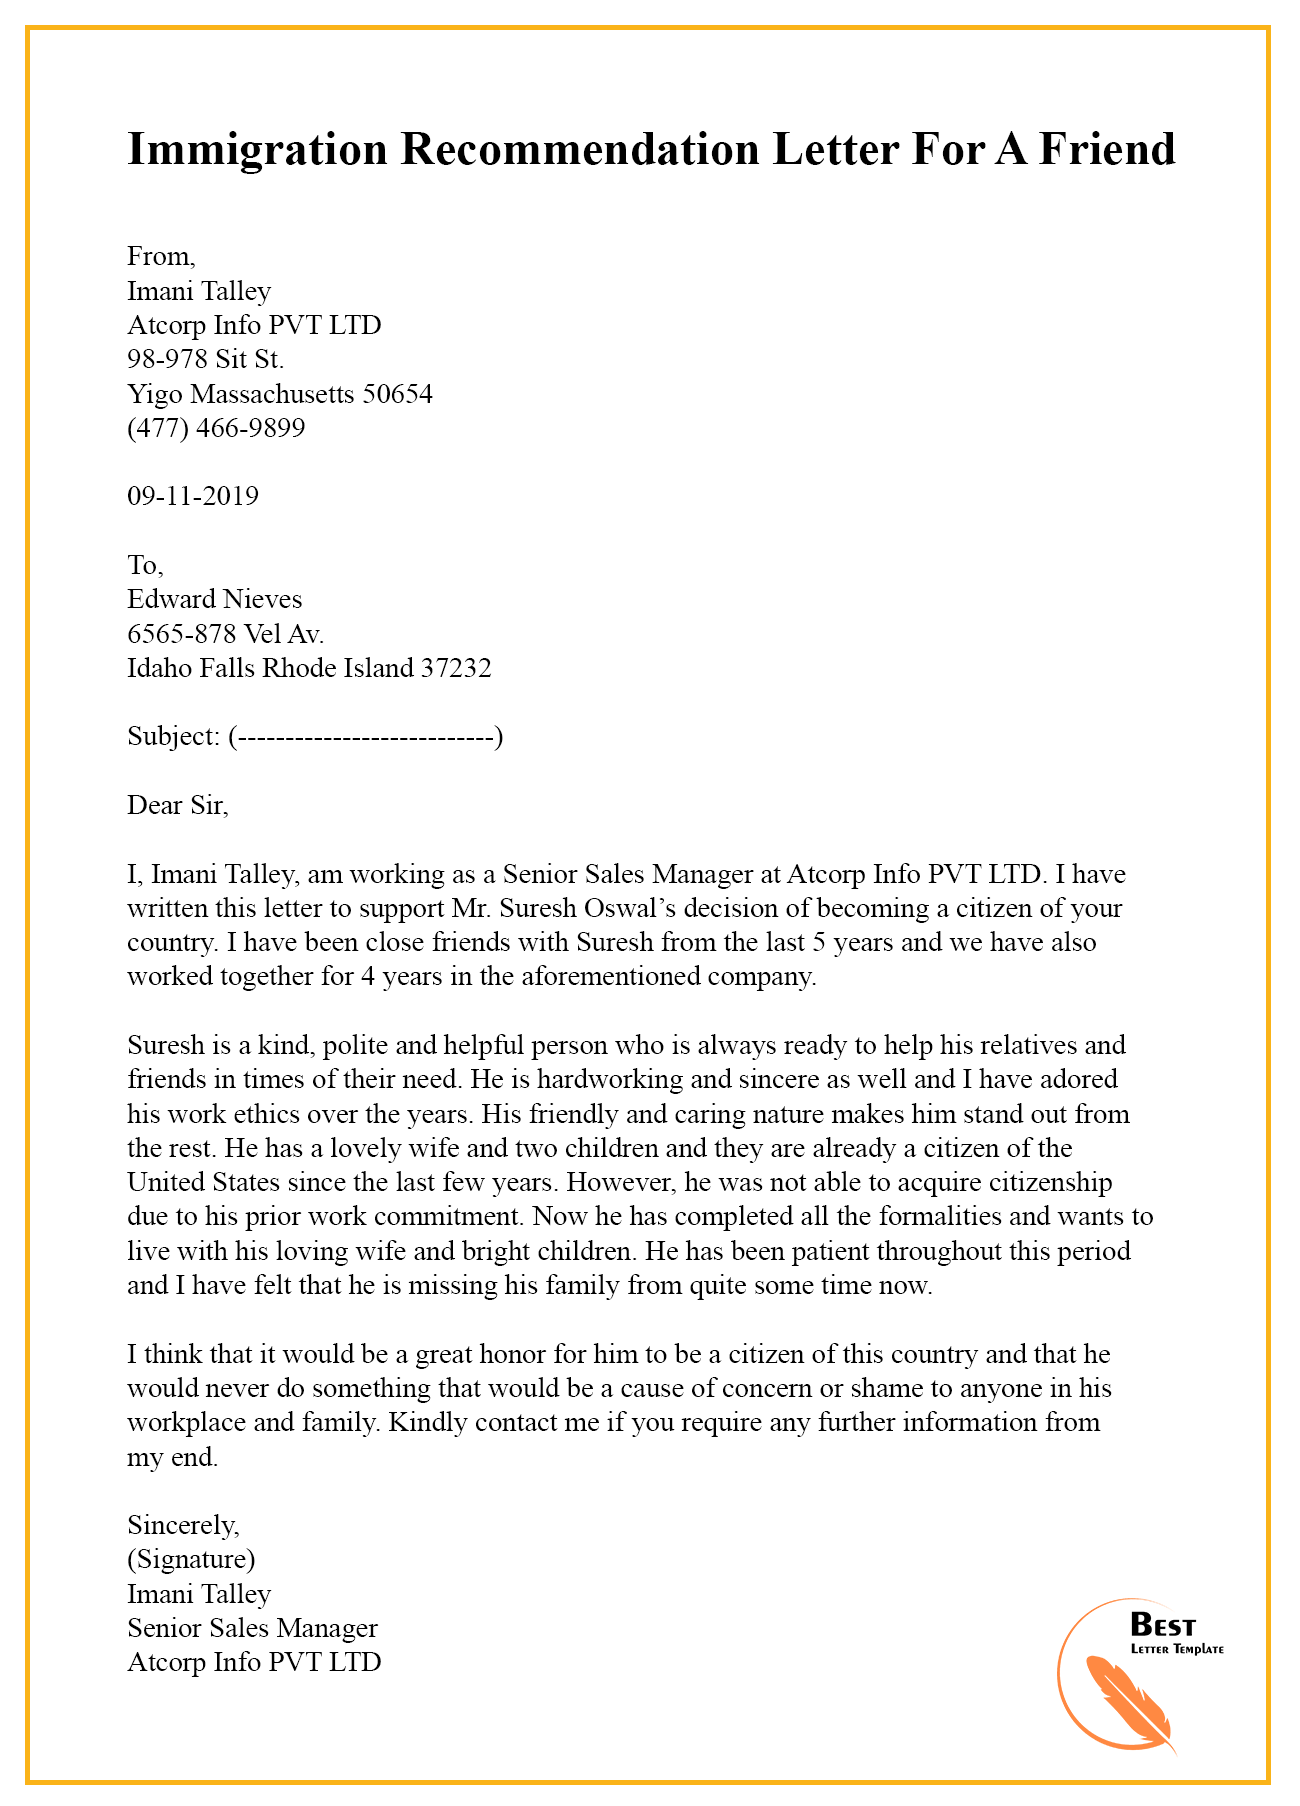 Recommendation Letter Template For a Friend